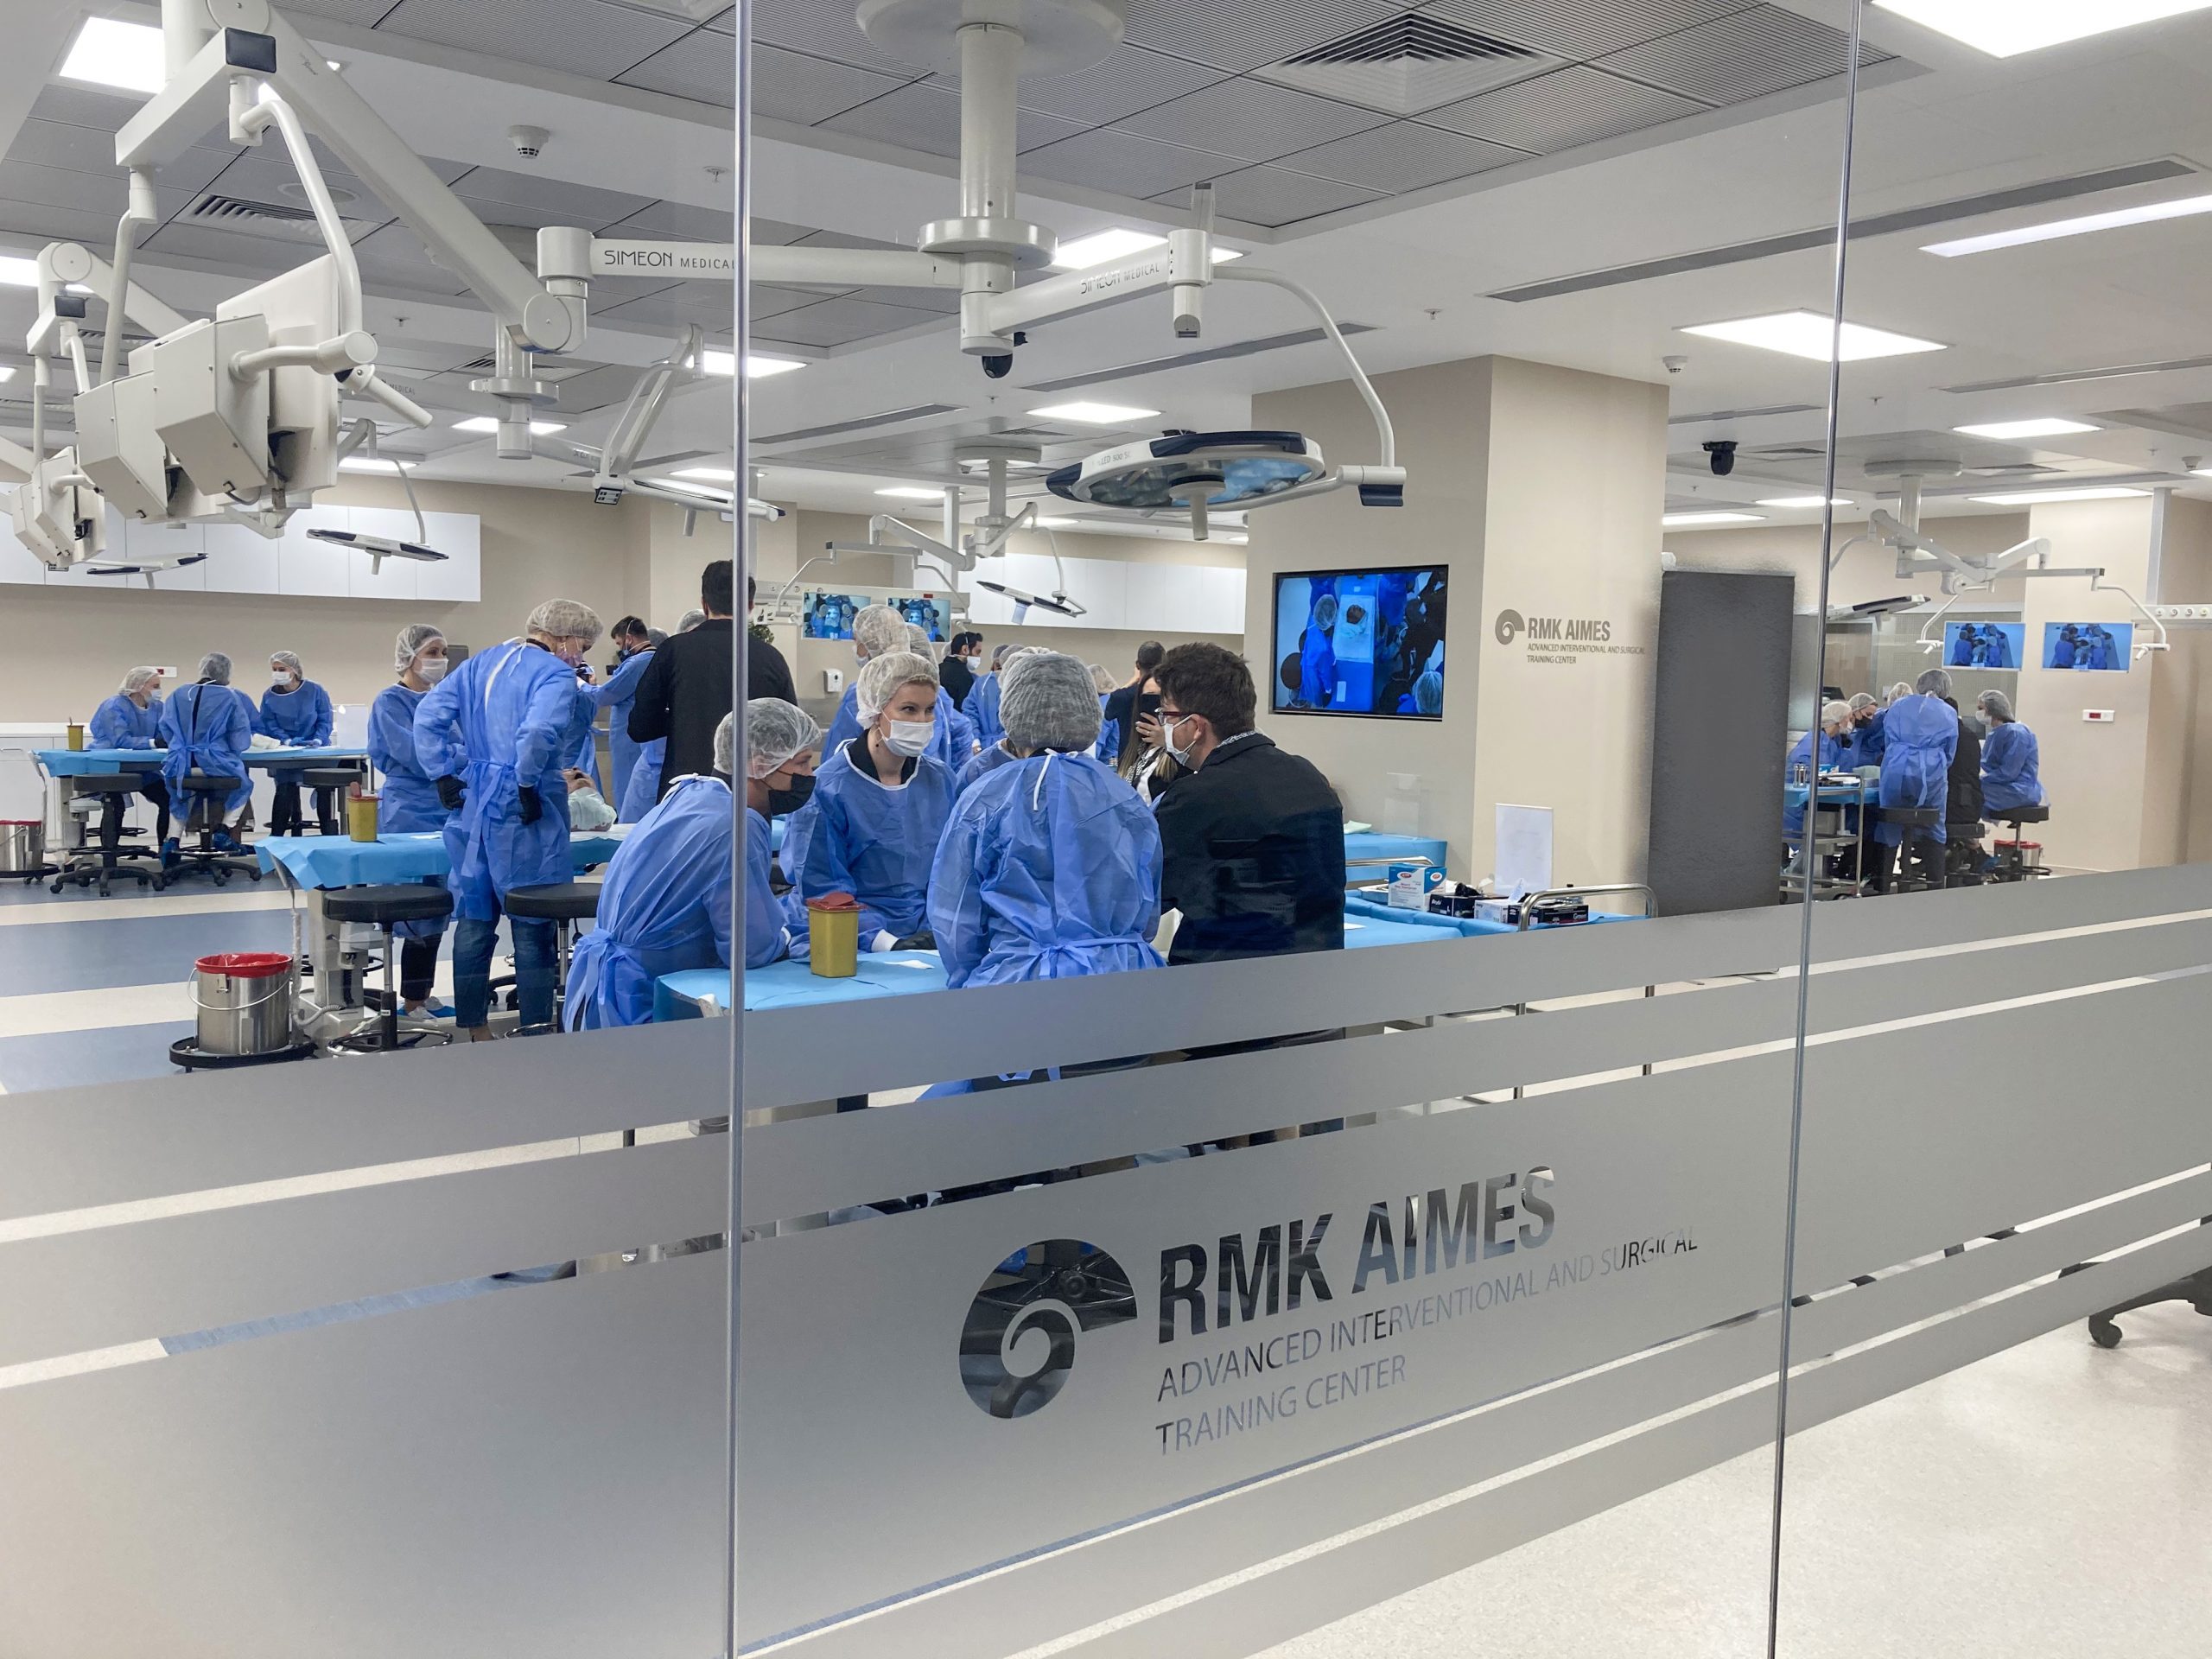 Healthcare simulation in Istanbul: the RMK AIMES